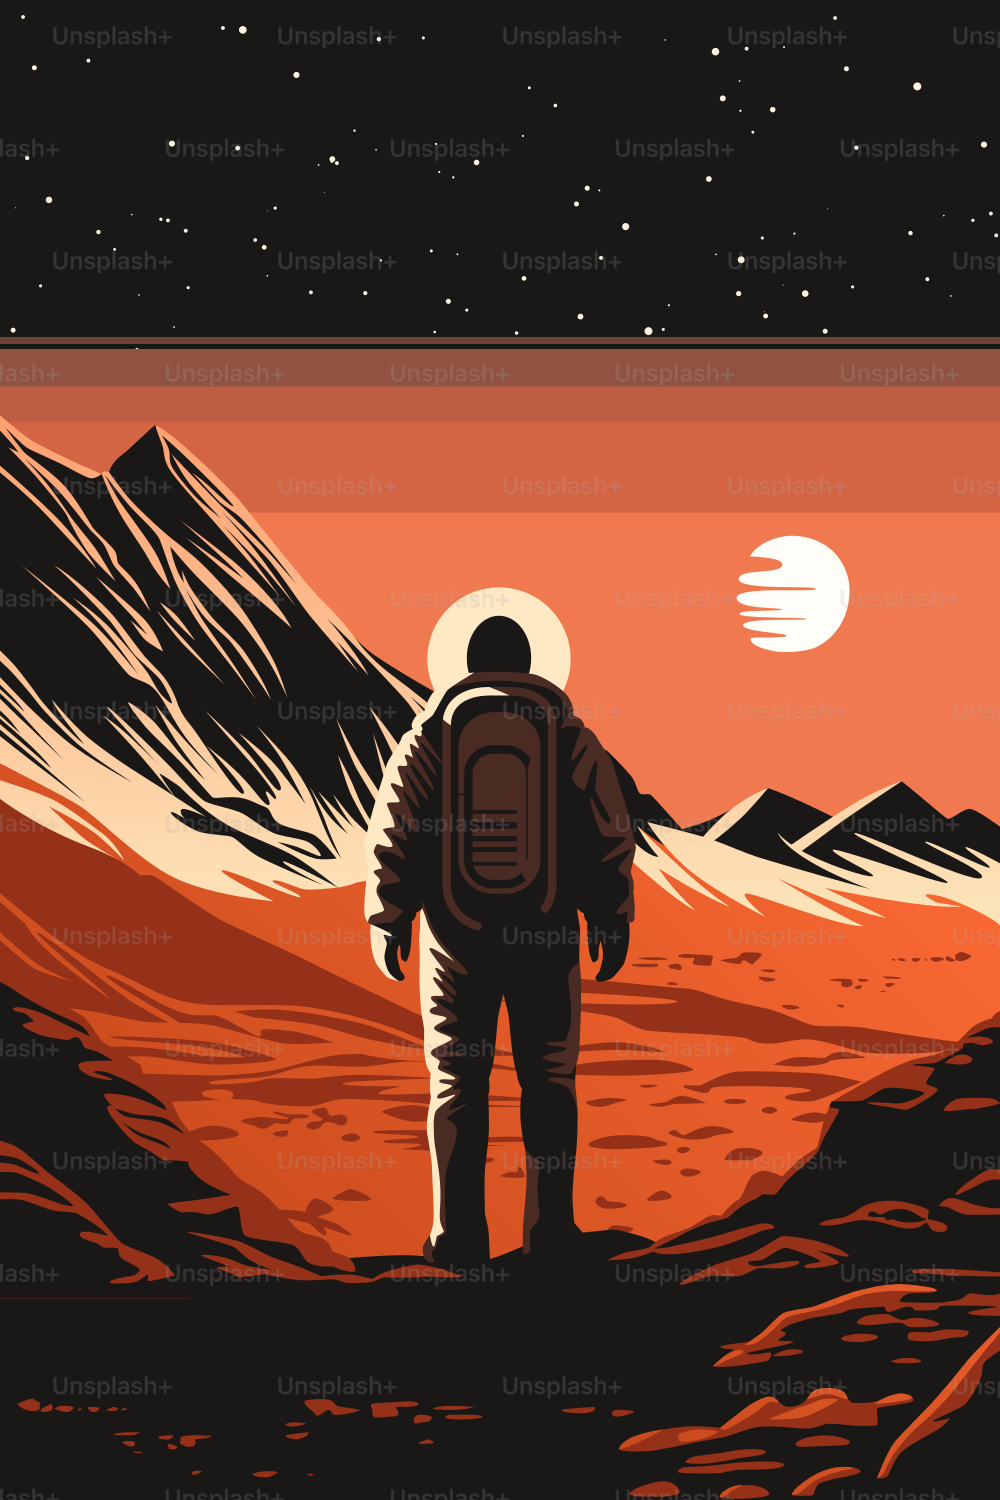 Human Solar System Colonization Poster. Astronaut on the Surface of Mars Looking at Skies with the Distant Sun.